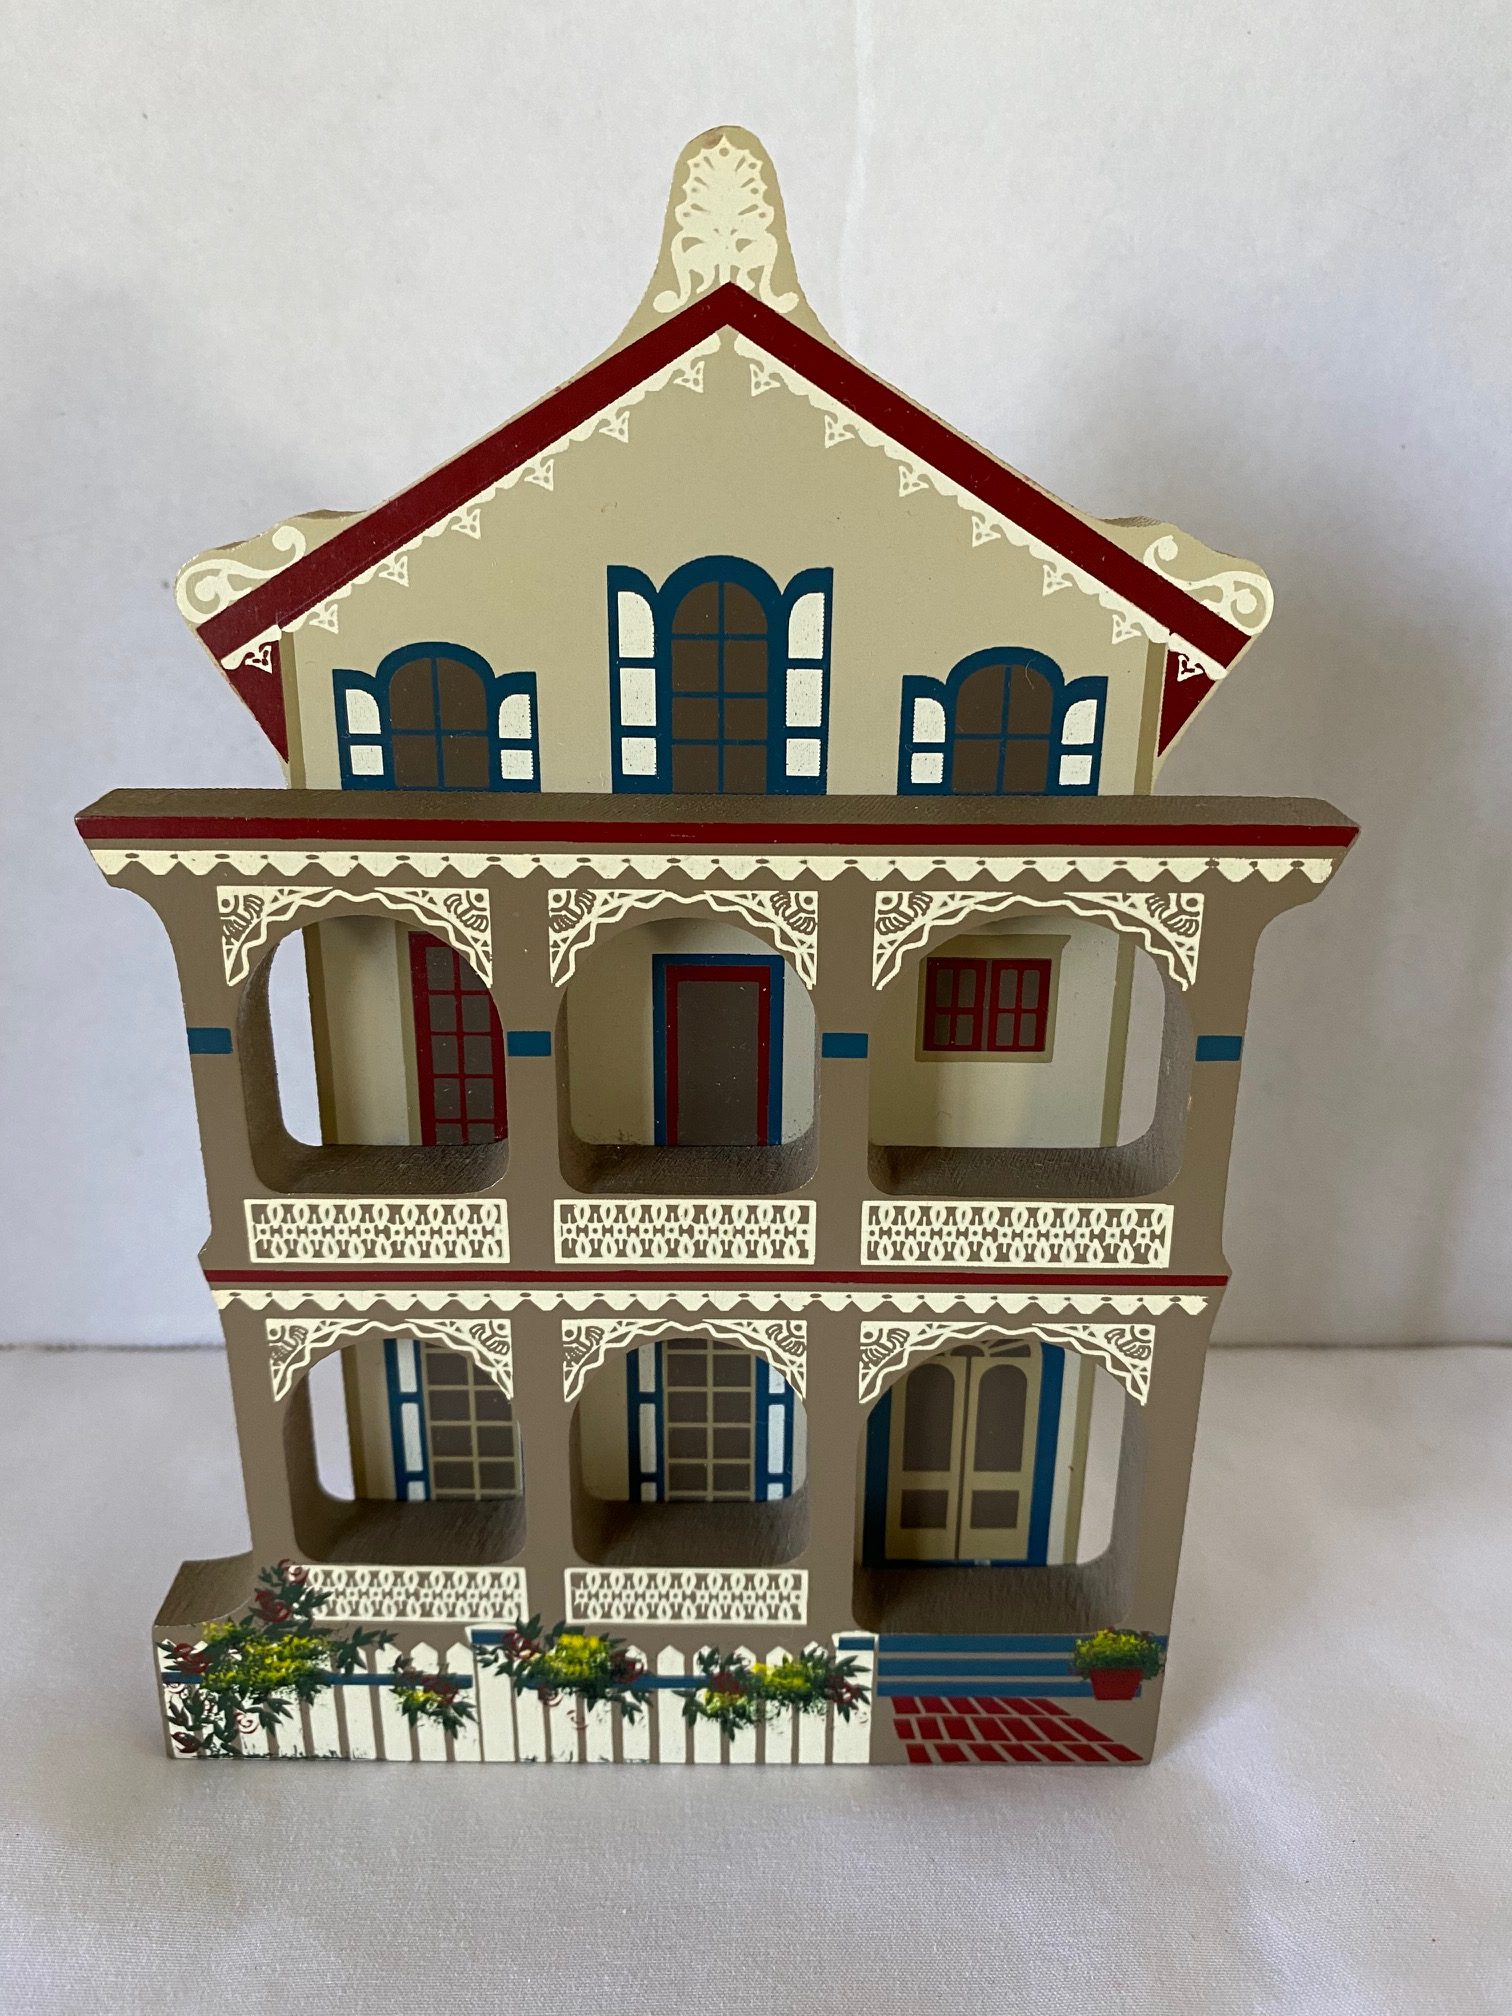 Sheila’s Collectable Wooden Hand Painted Shelf Sitters “Stockton Place Row Houses” 1993